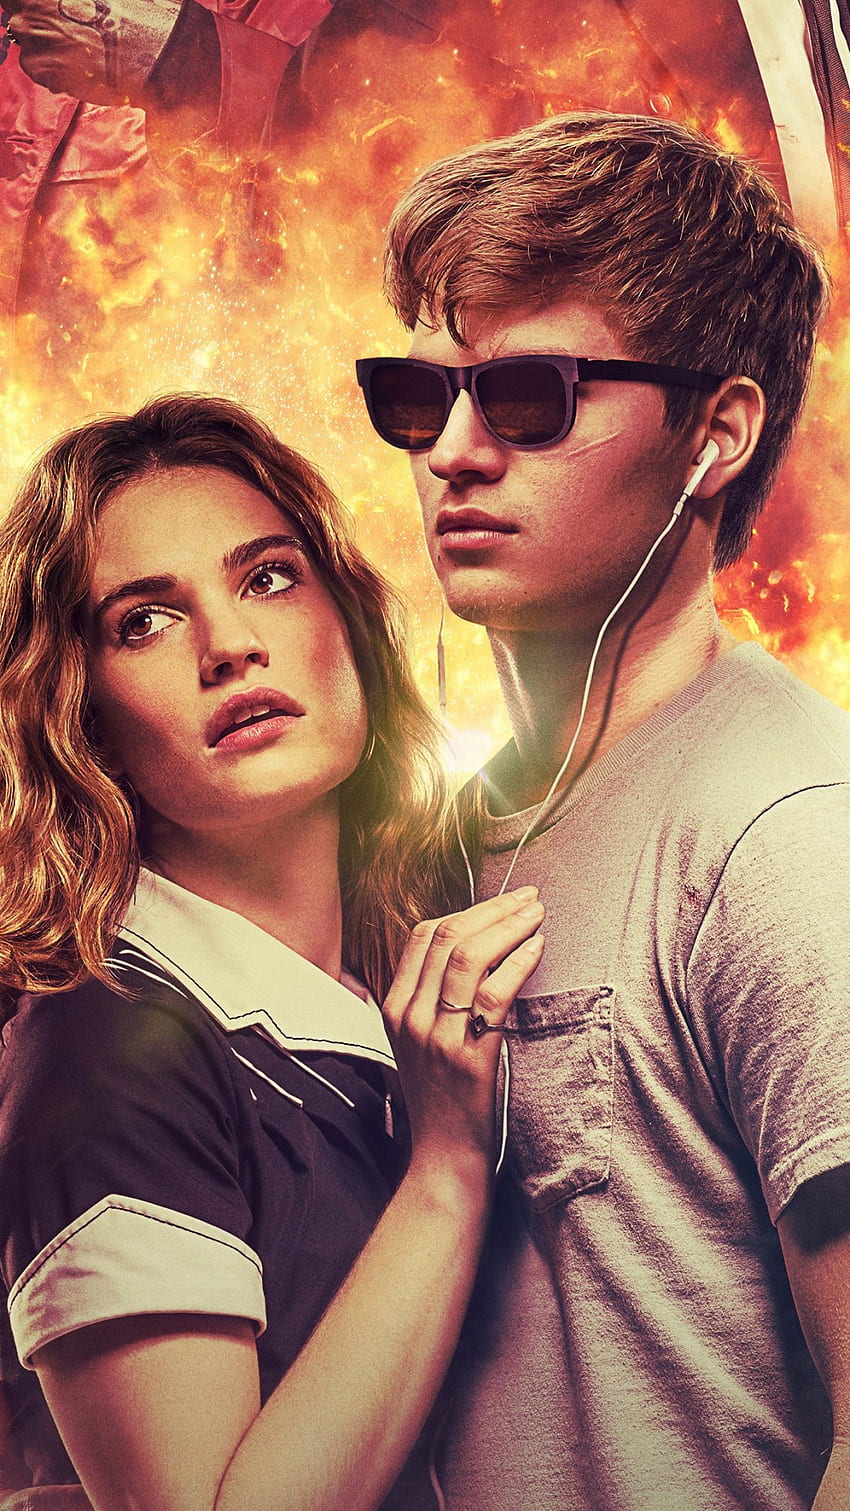 Baby Driver, Ansel Elgort, Lily James for iPhone 8, iPhone 7 Plus, iPhone 6+, Sony Xperia Z, HTC One, Baby Driver iPhone HD phone wallpaper